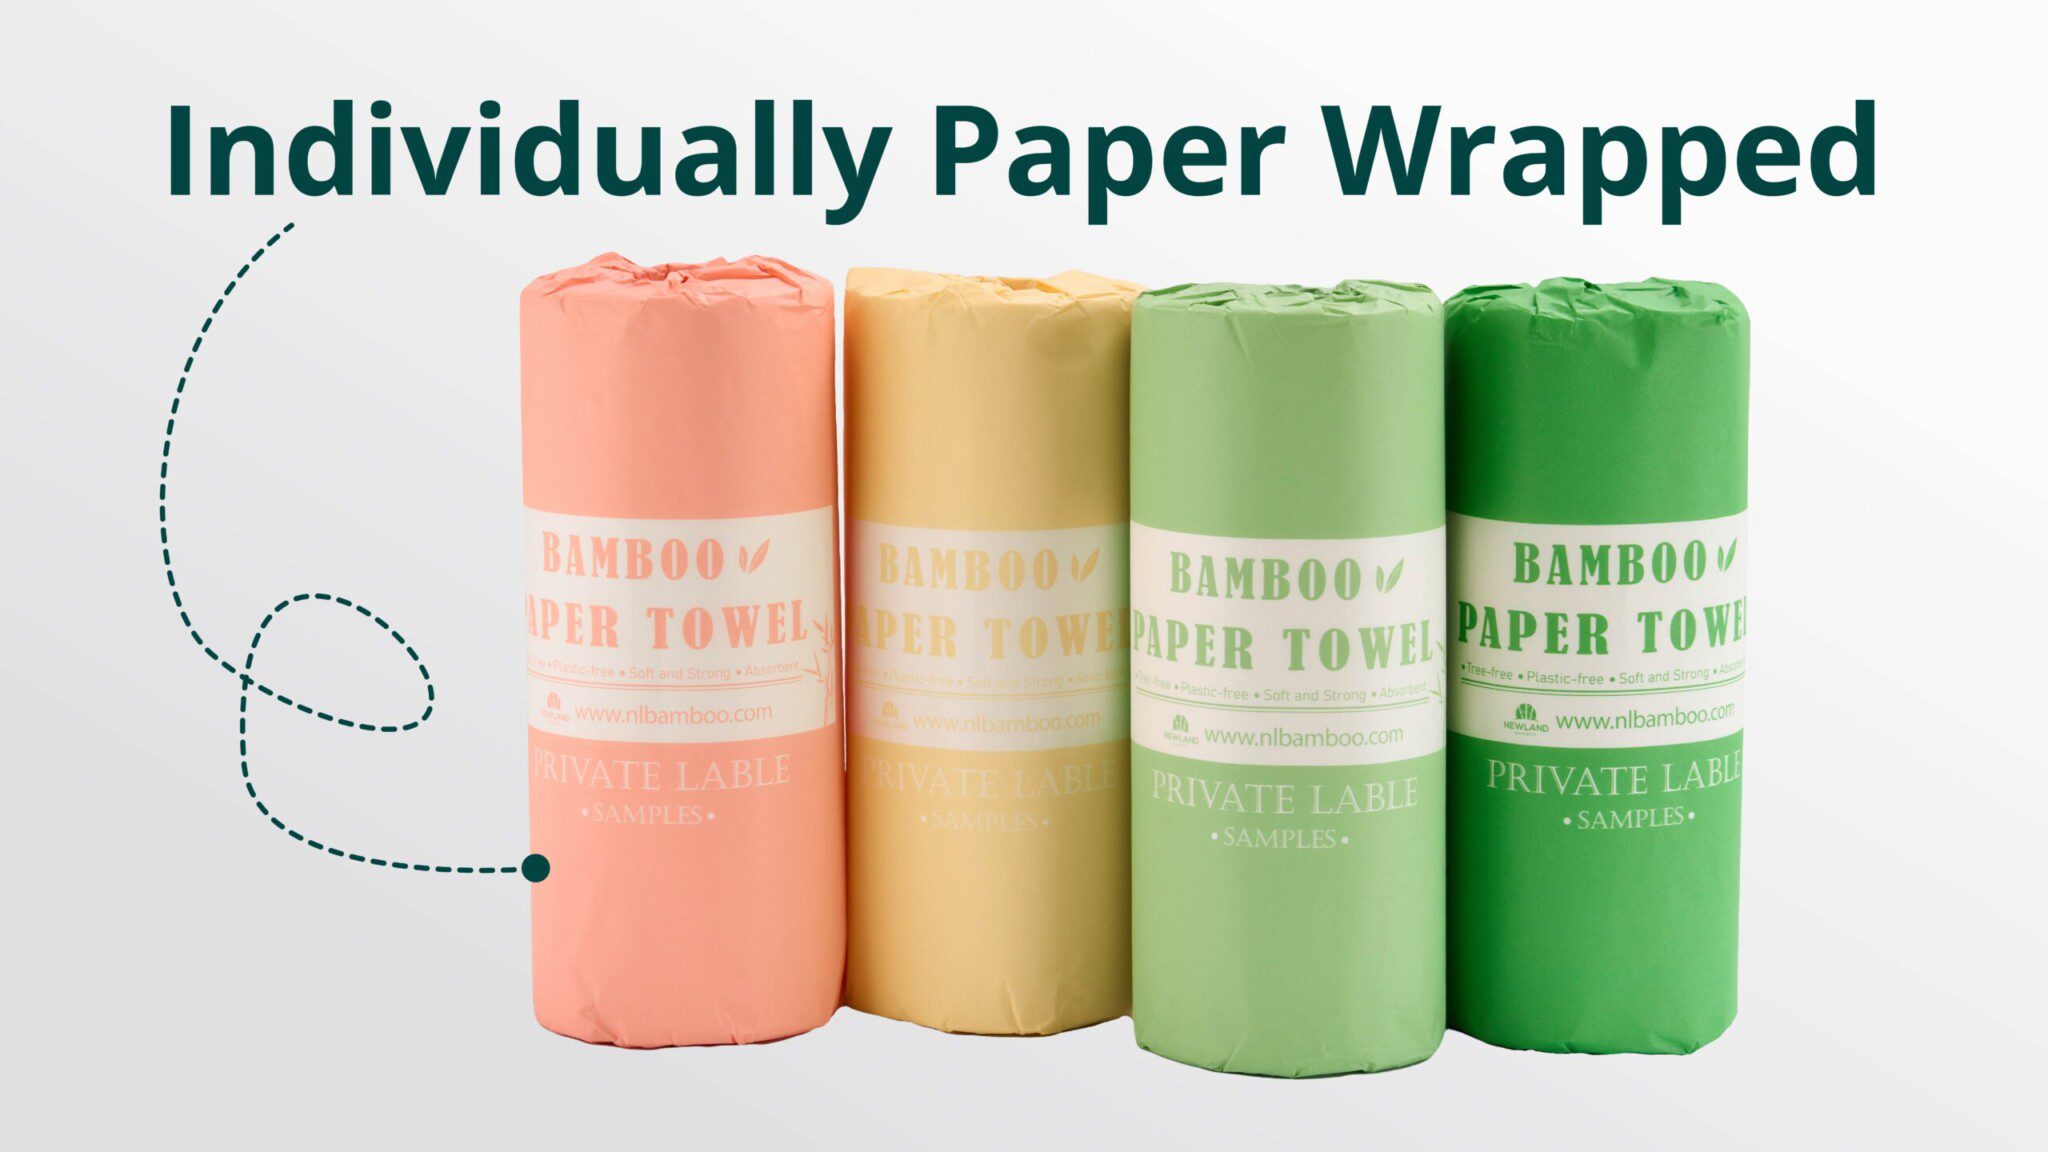 individually paper wrapped kitchen paper towels